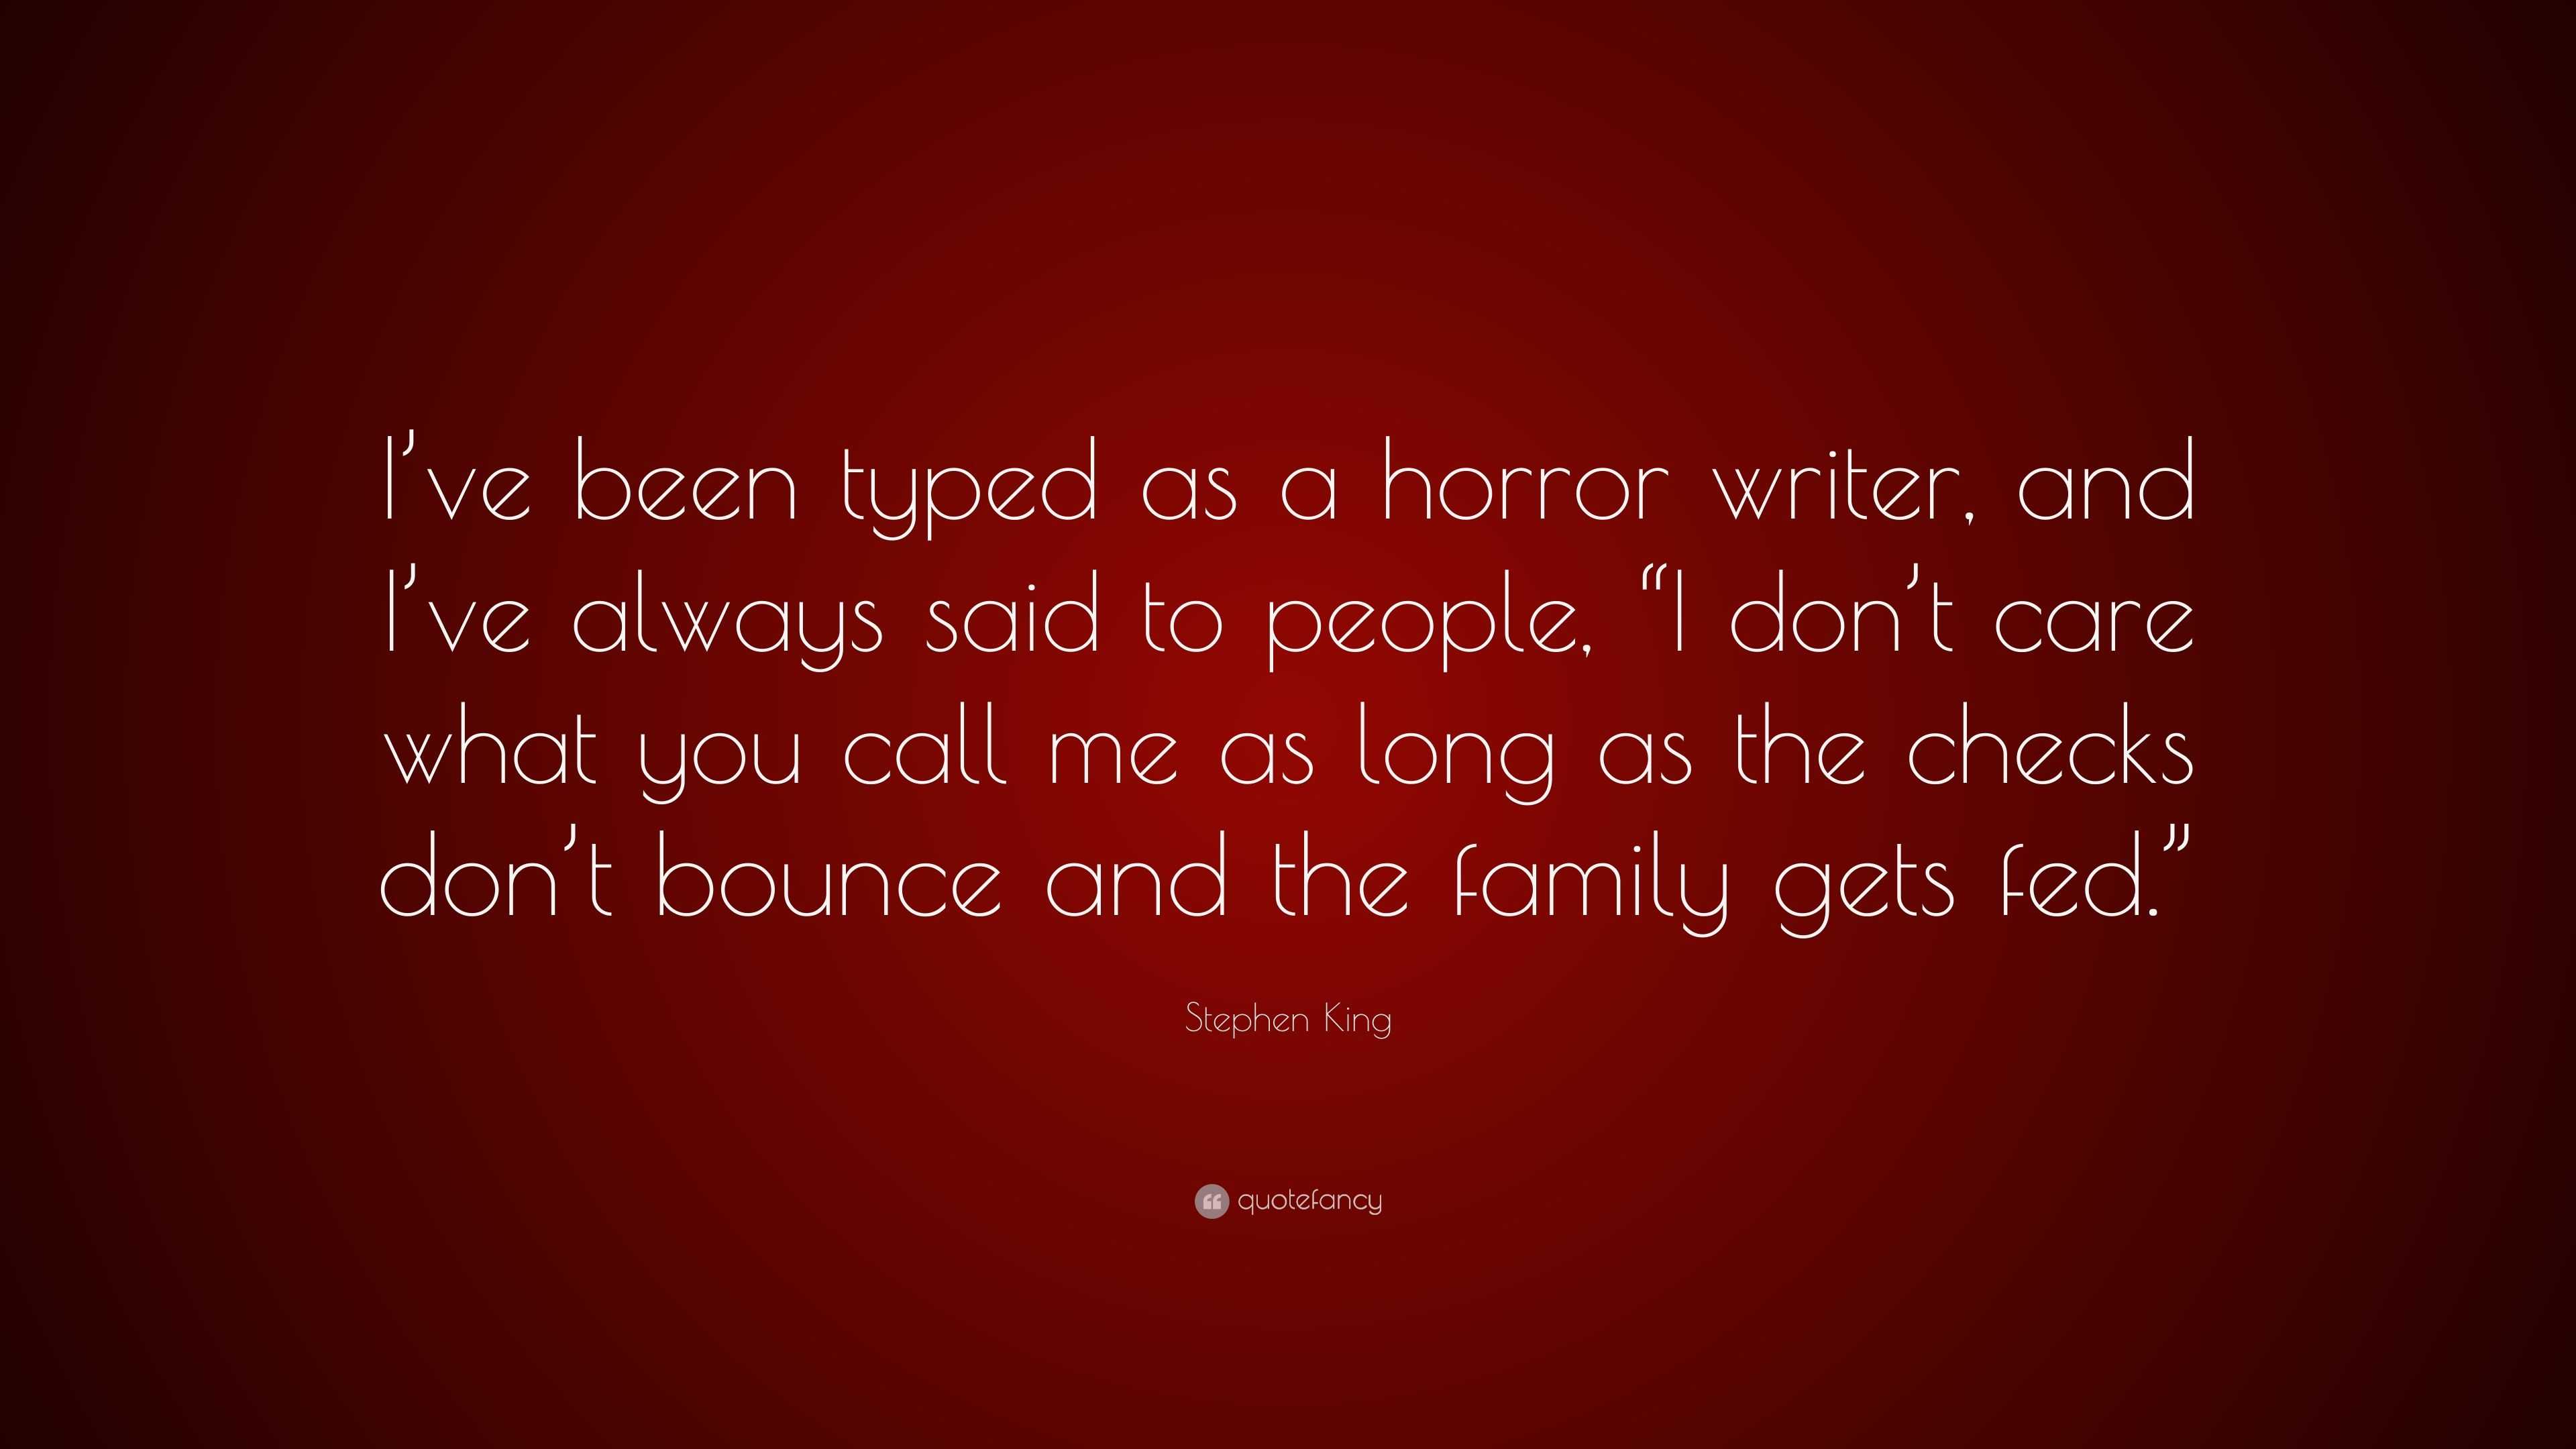 Stephen King Quote: “I’ve been typed as a horror writer, and I’ve ...